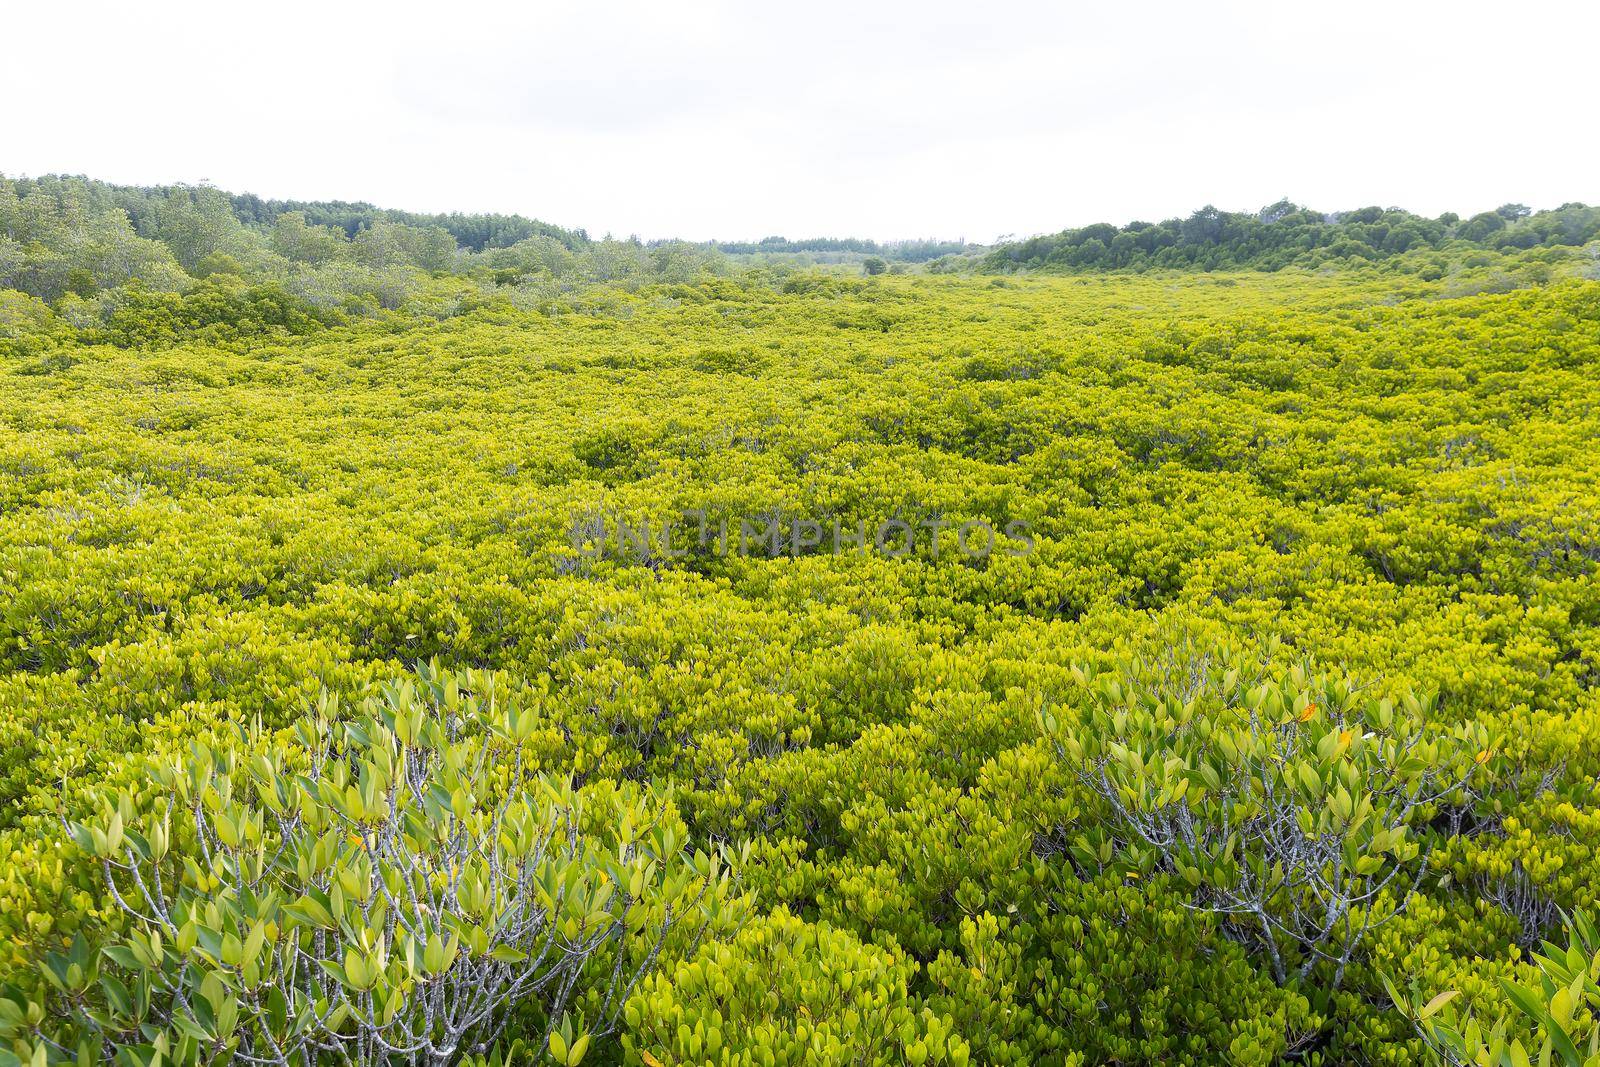 Ceriops tagal forest in wide mangrove area